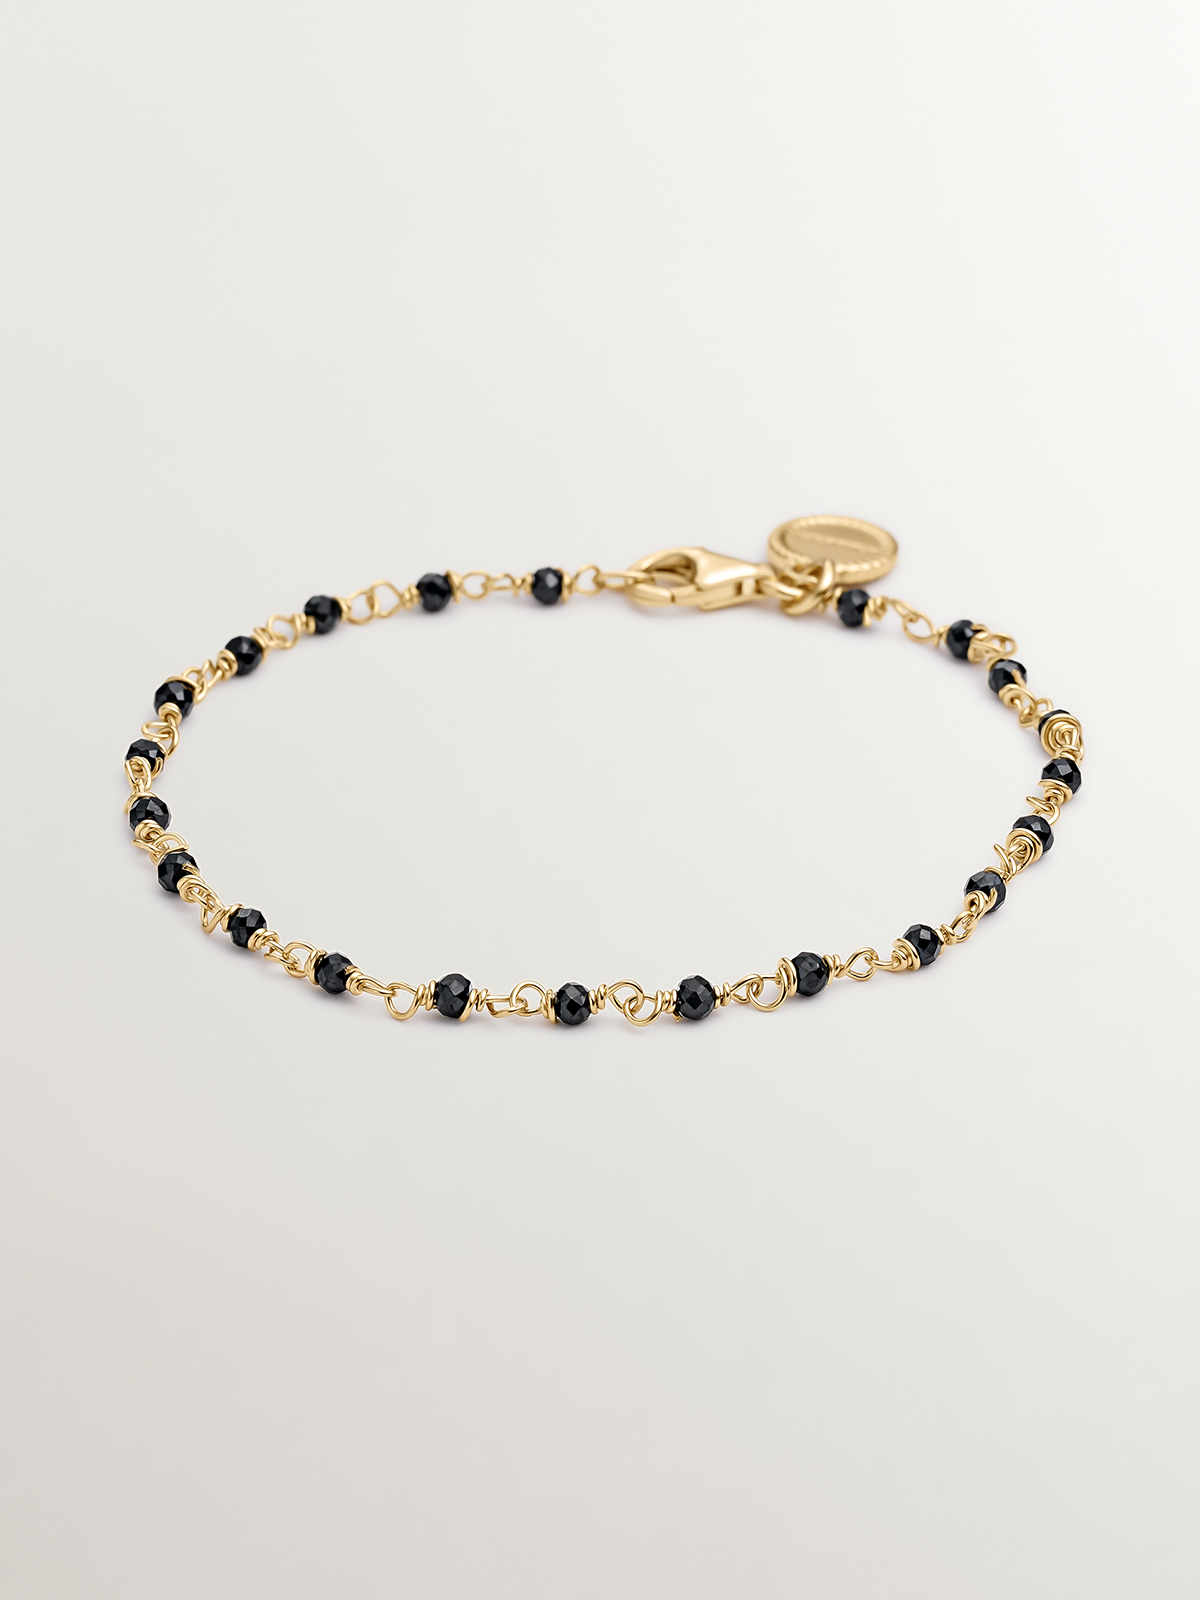 18K Yellow Gold Plated 925 Silver Bracelet with Black Spinel